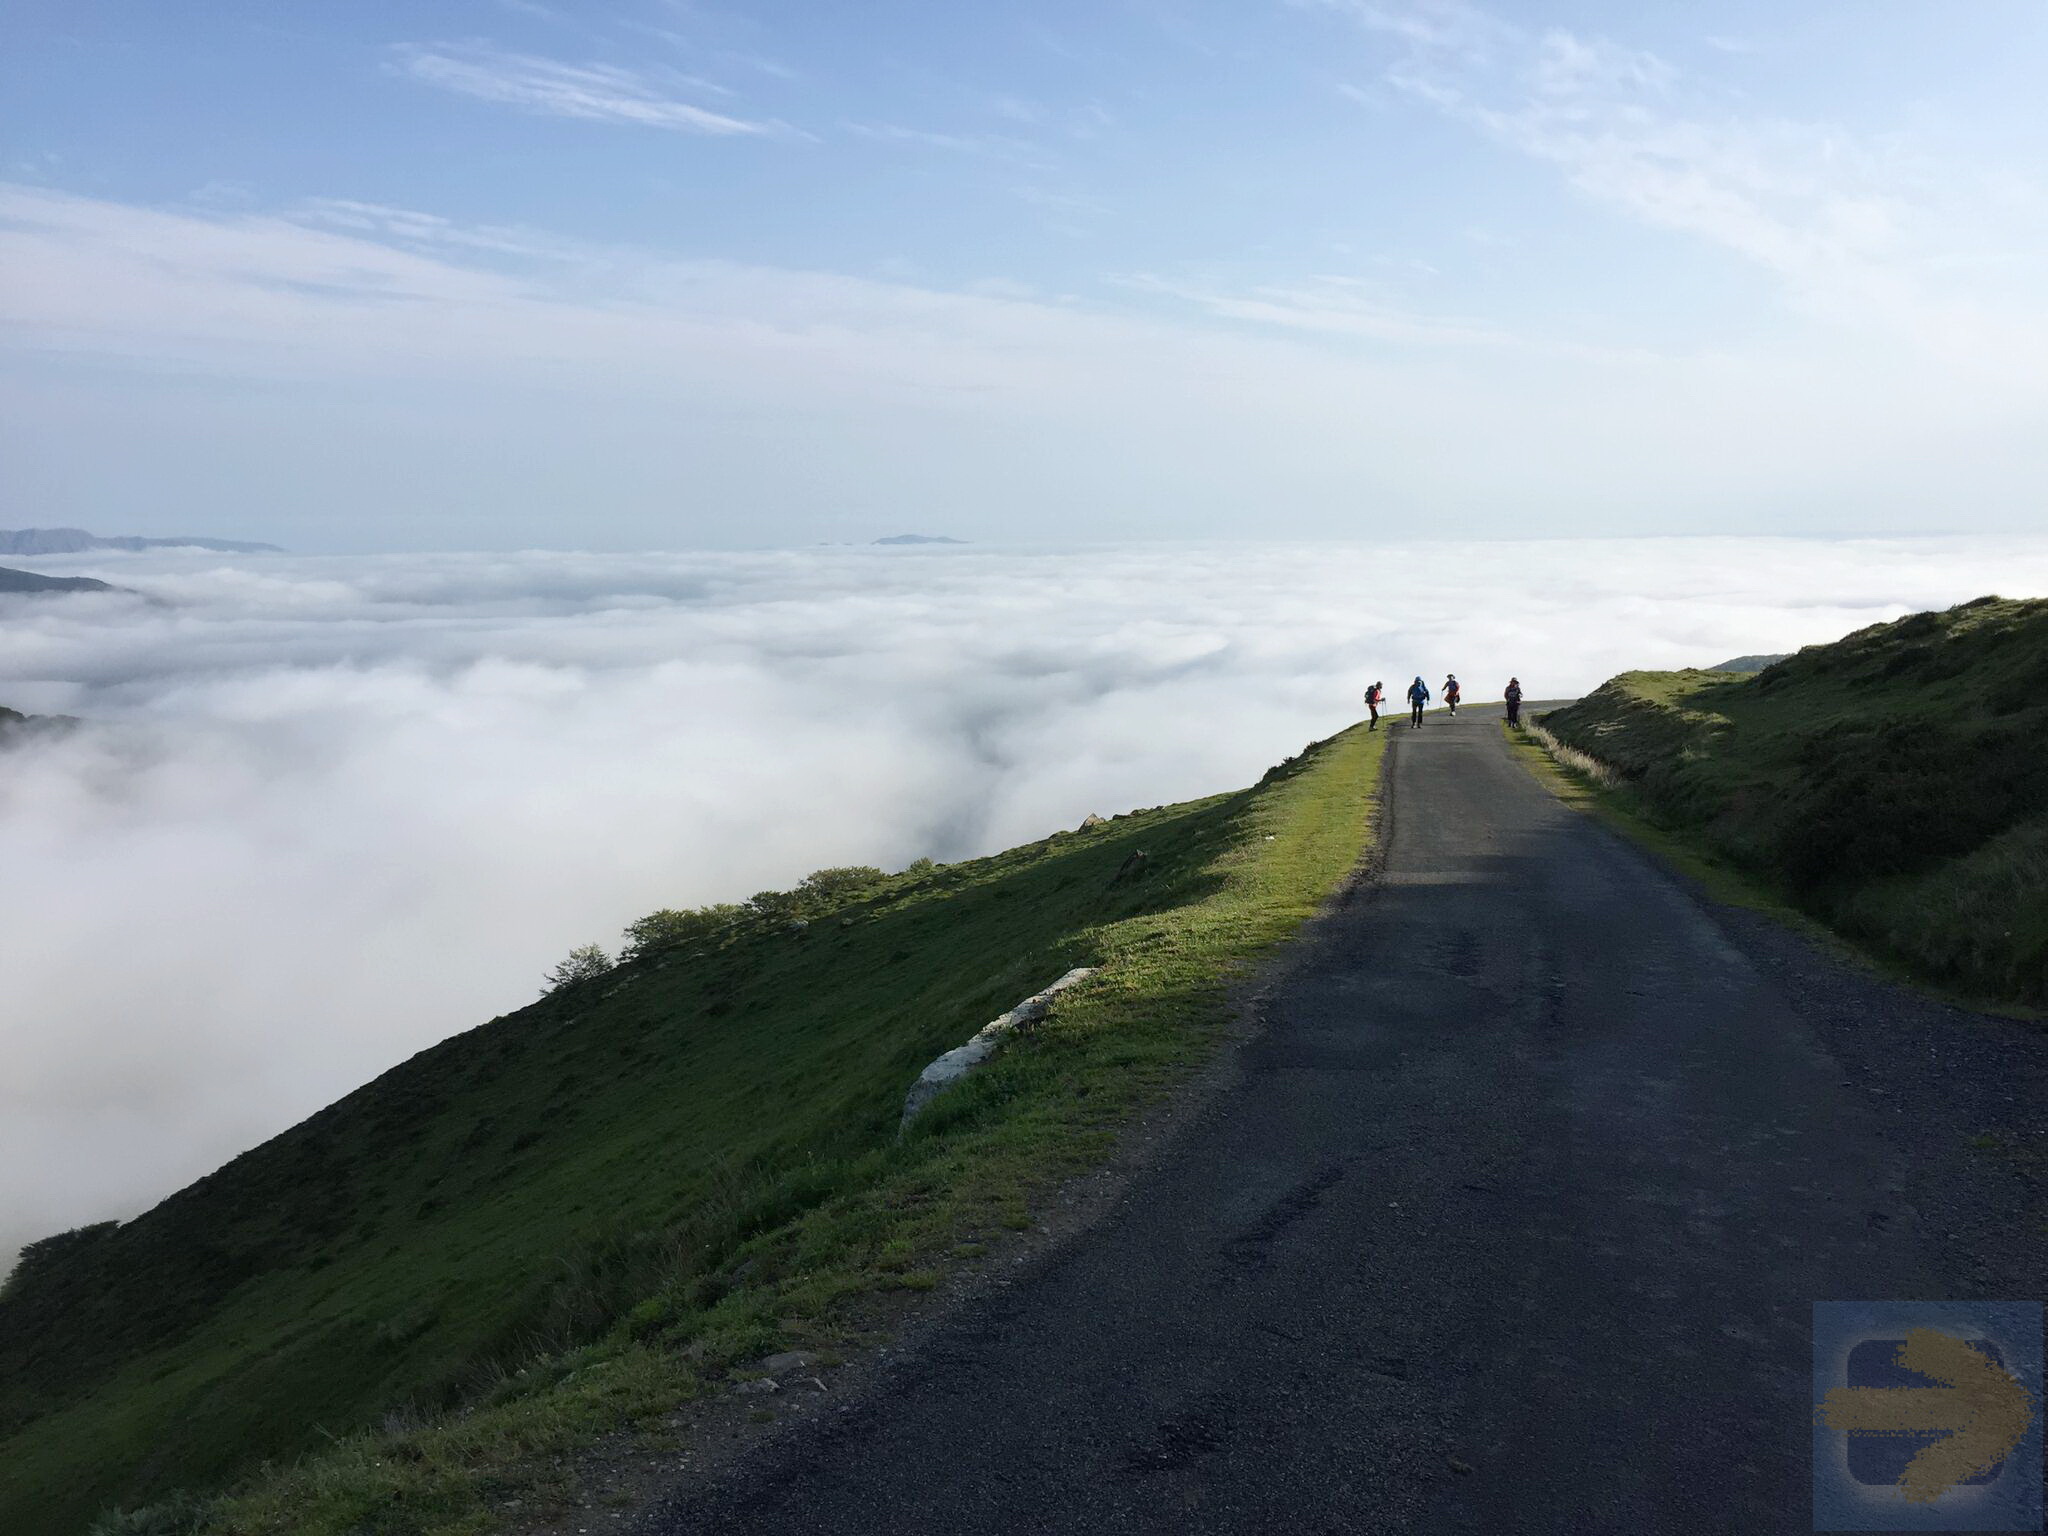 Above the clouds - Pyrenees May 2016